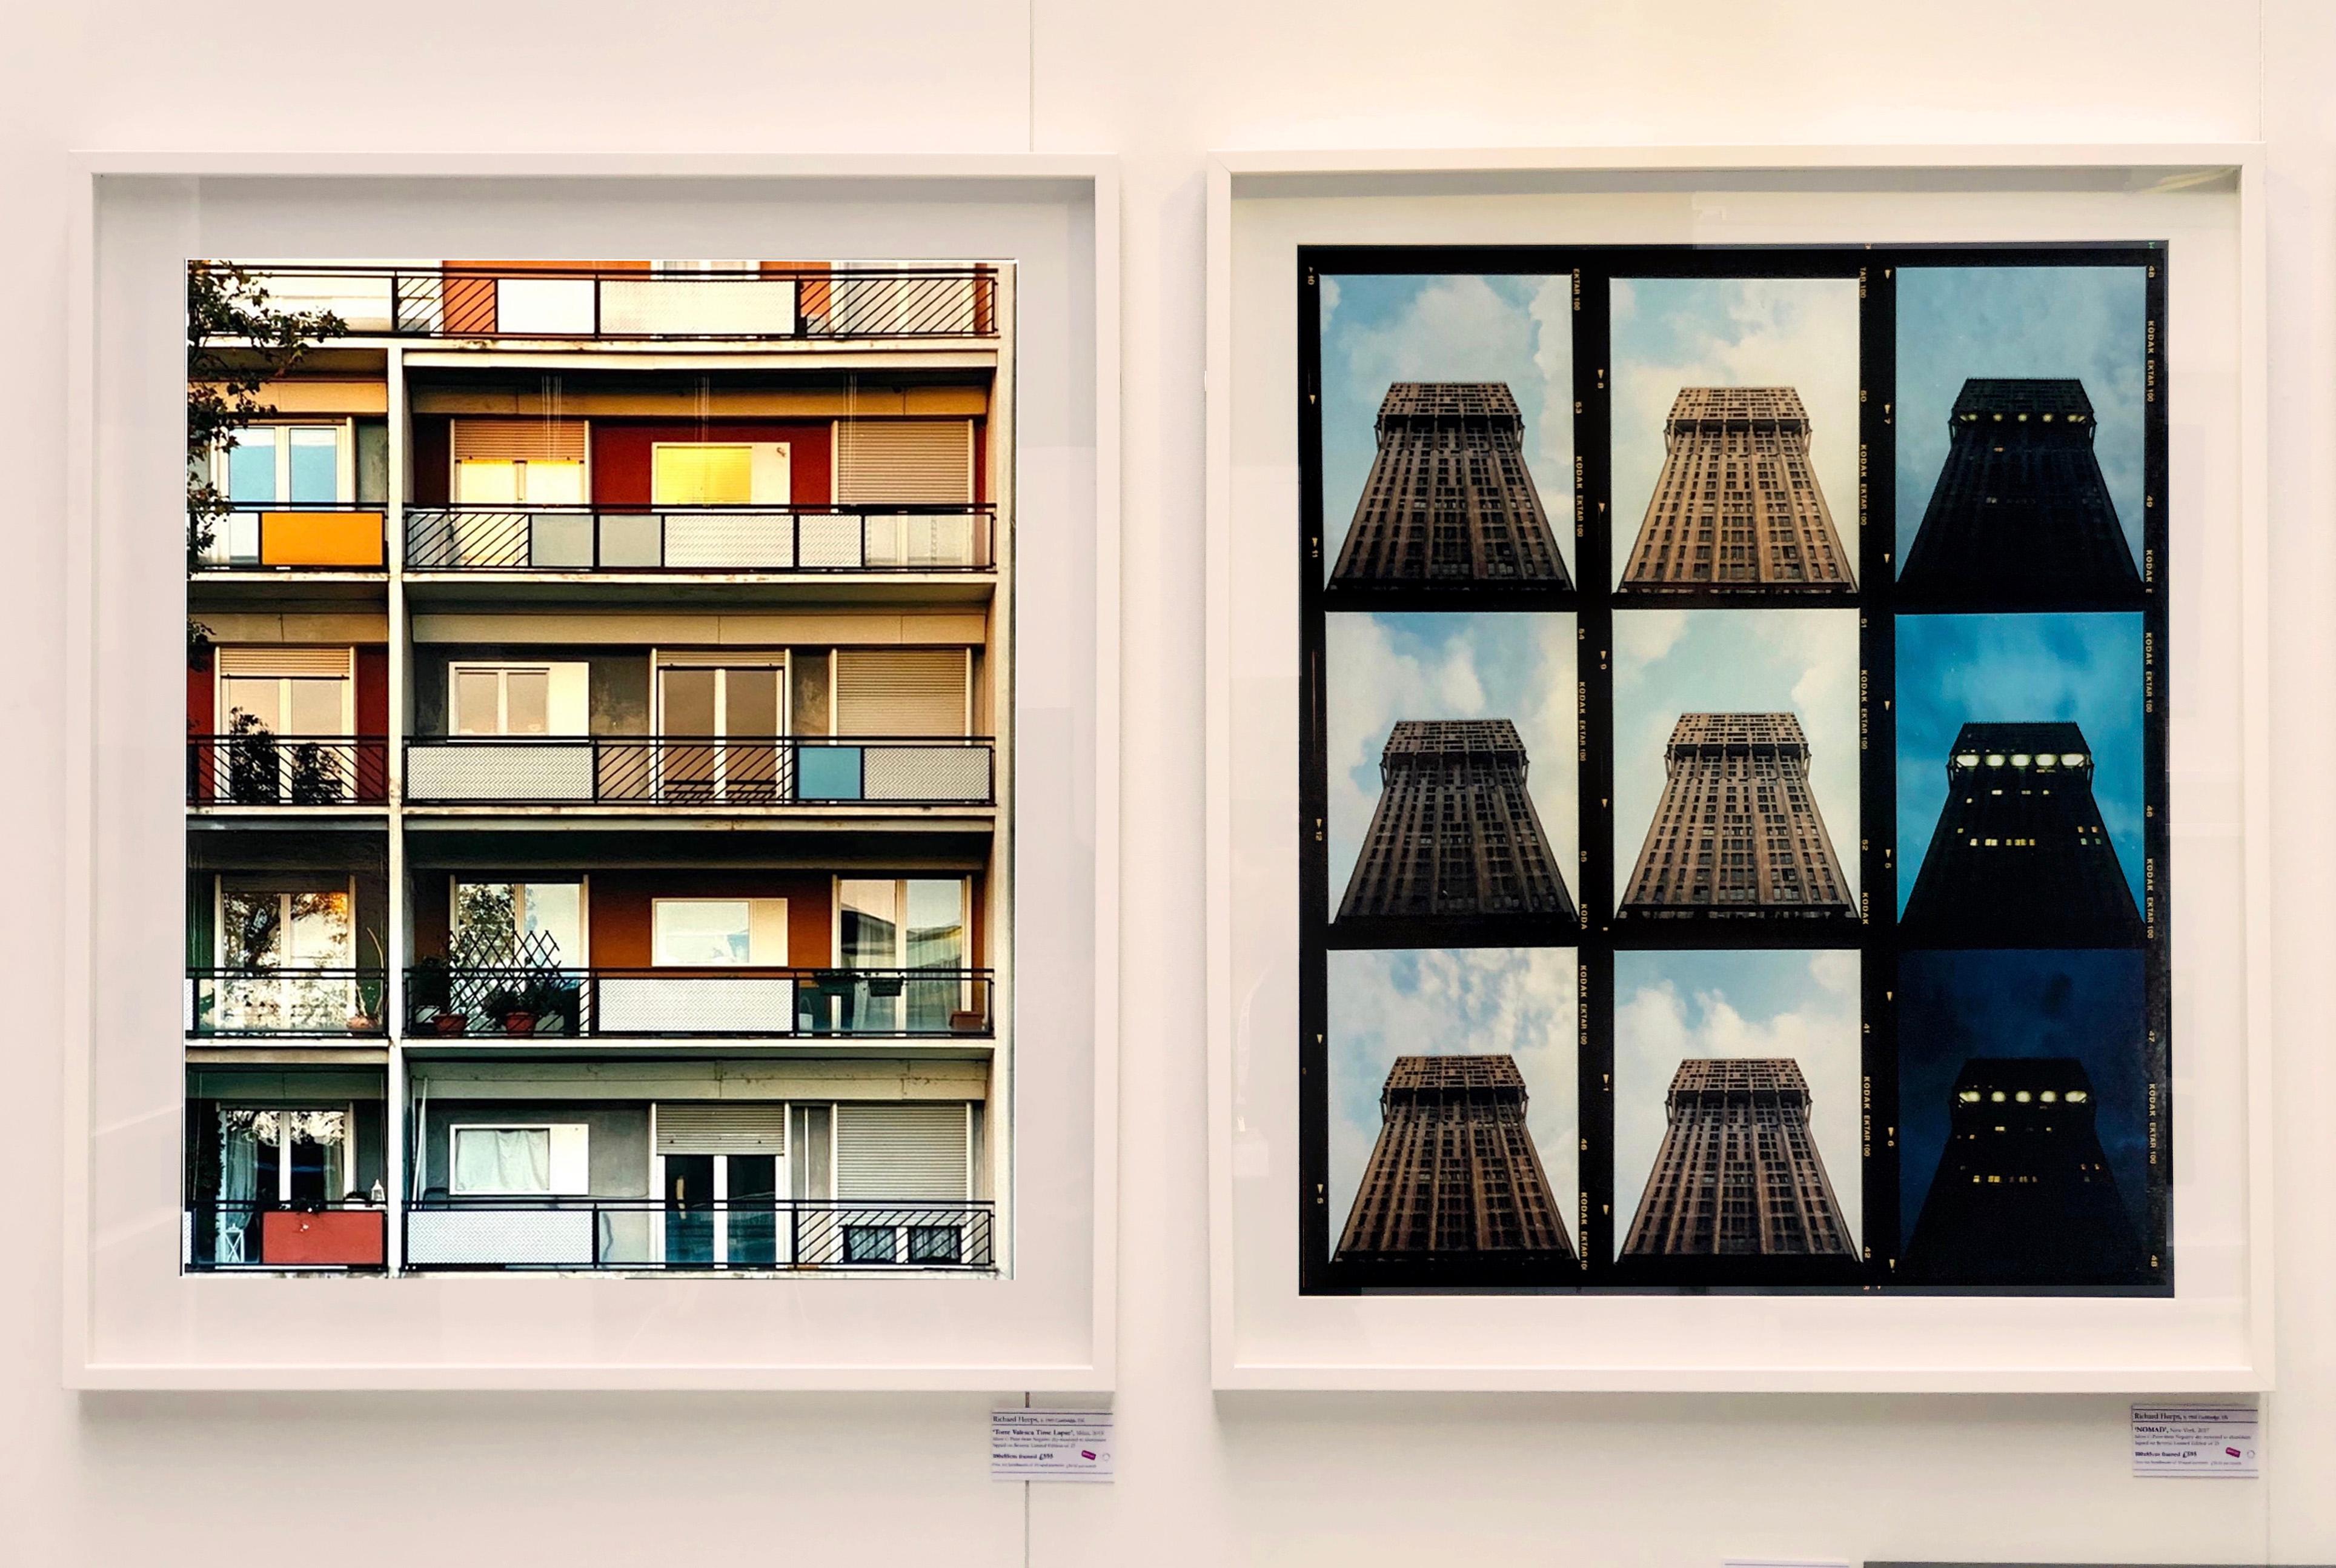 49 Via Dezza, Gio Ponti's iconic Milanese apartments, captured at sunset, from Richard Heeps series A Short History of Milan began as a special project for the 2018 Affordable Art Fair Milan. It was well received and the artwork has become popular